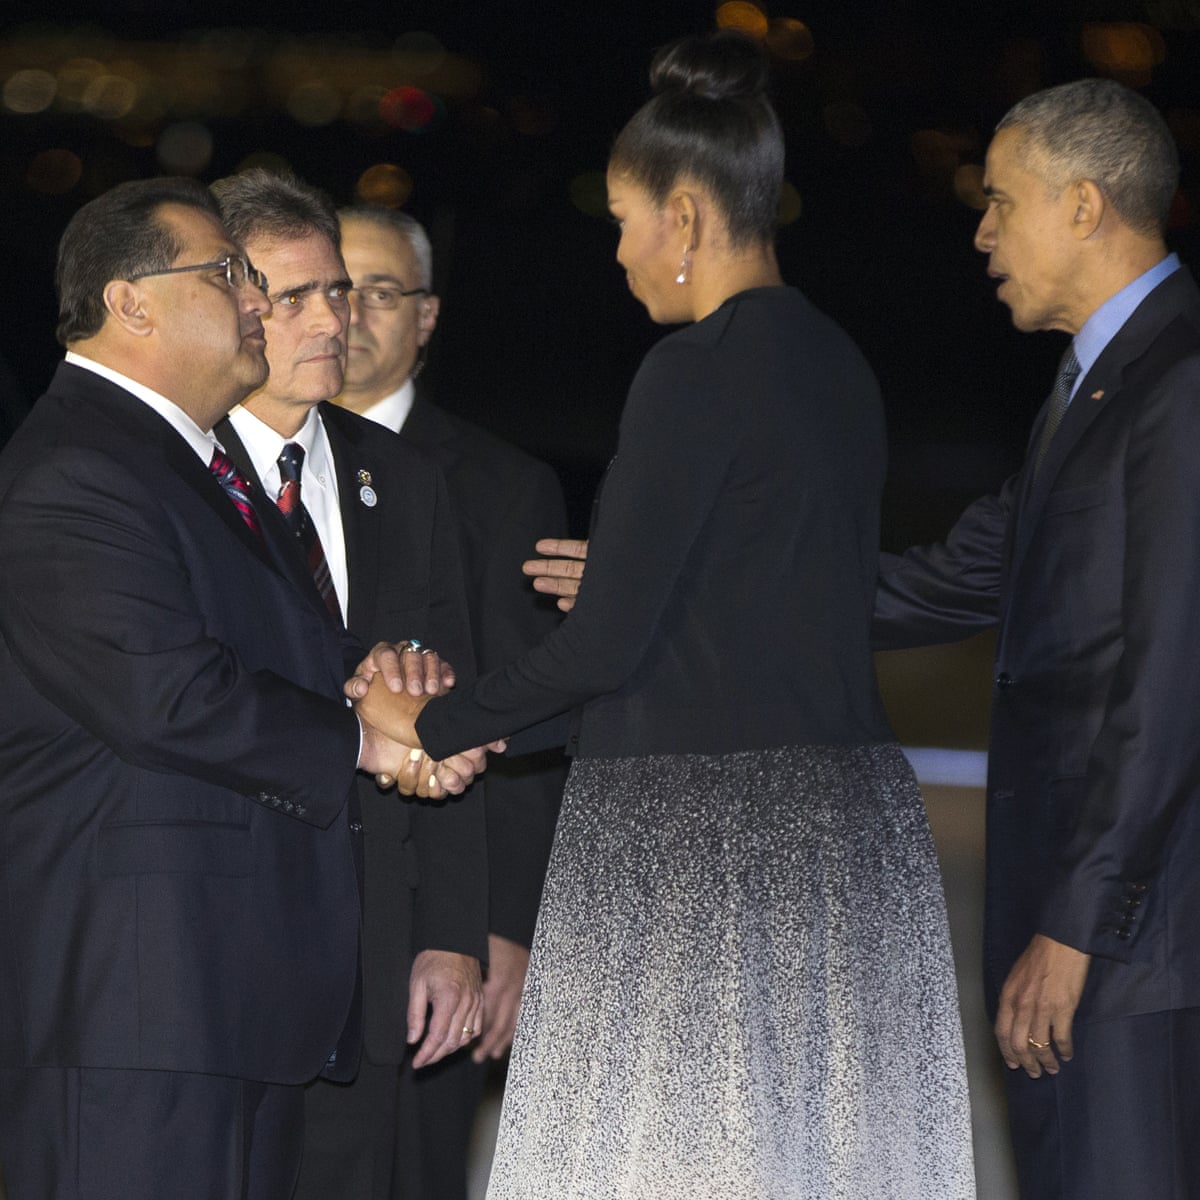 First Lady Michelle Obama and President Barack Obama shake hands with city and county officials